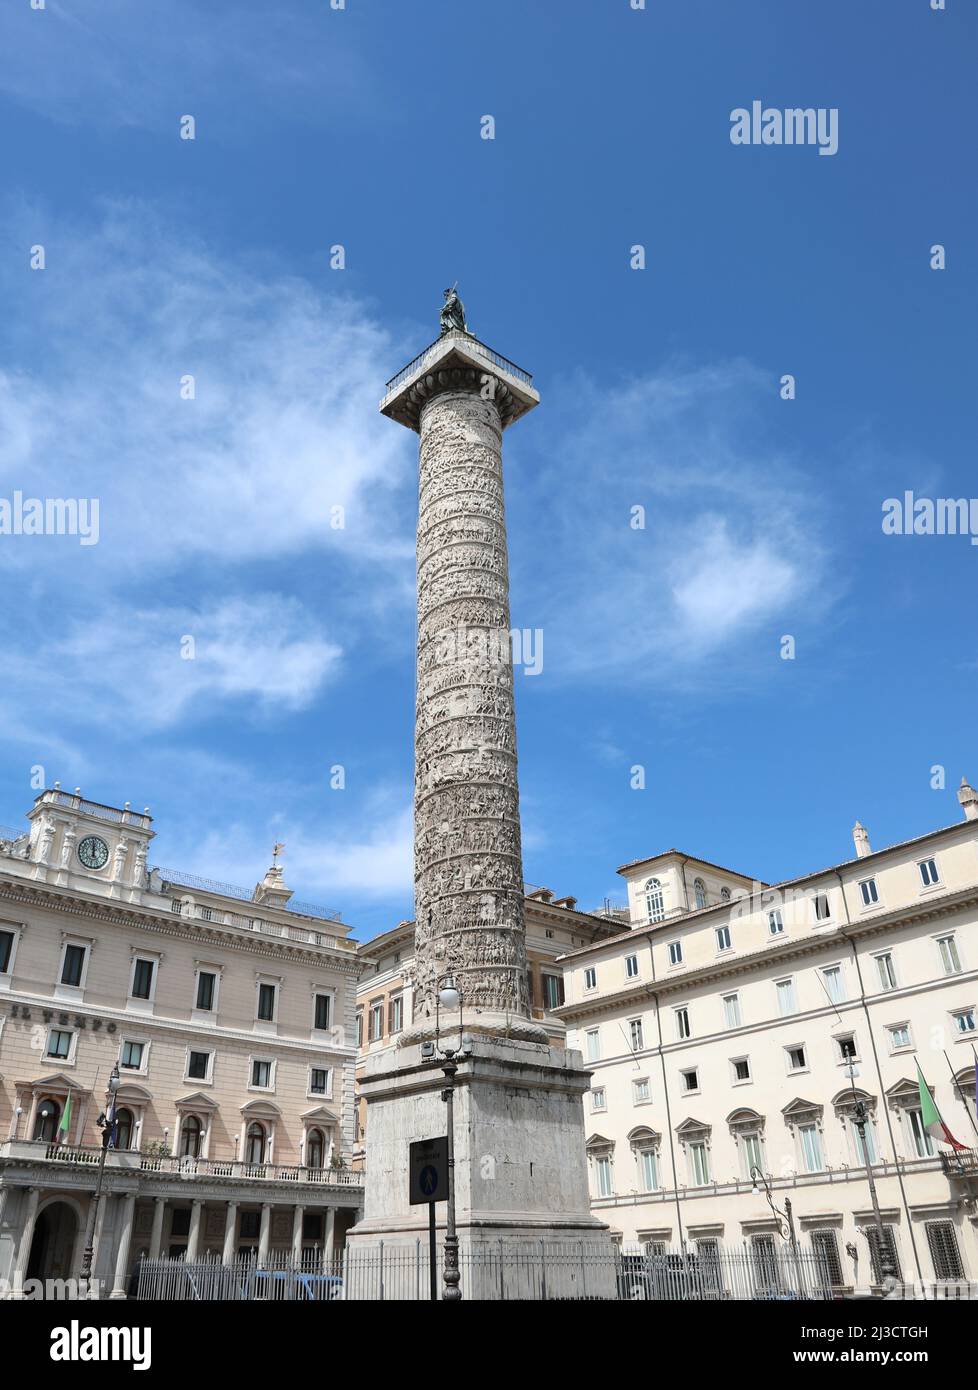 Rome, RM, Italy - August 18, 2020: Ancient Roman column and the Cigi Palace seat of italian government Stock Photo